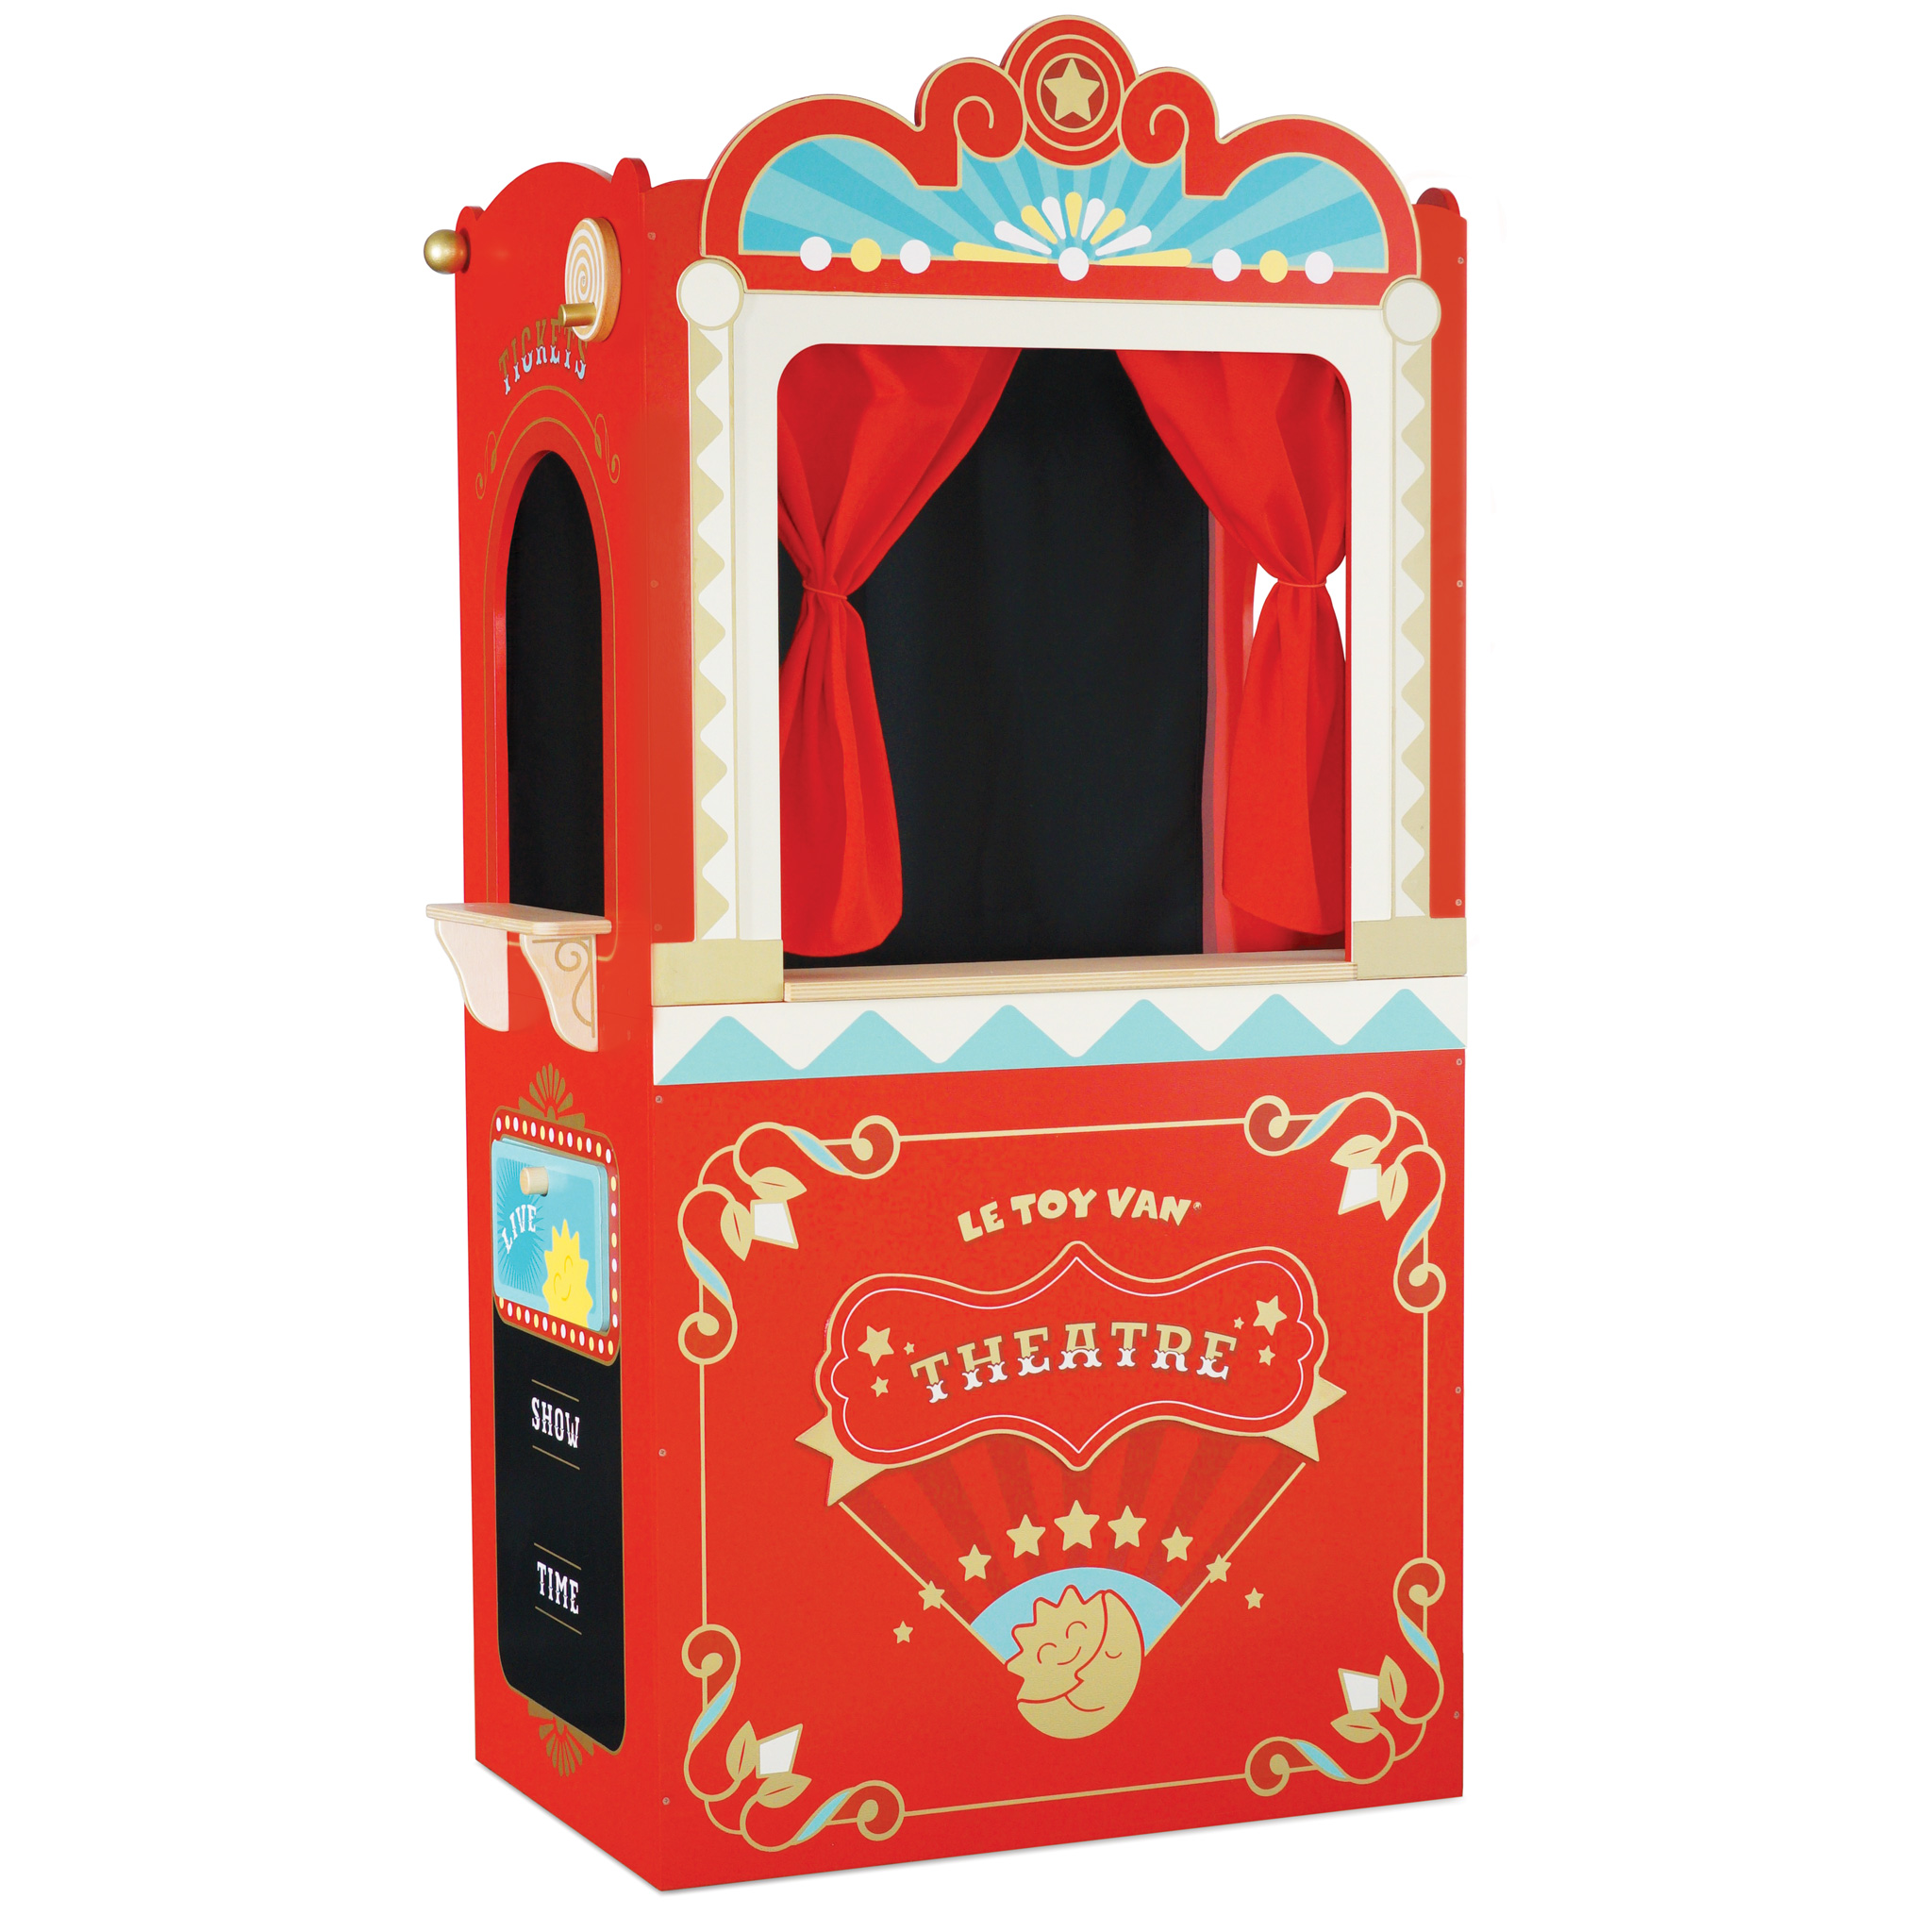 Showtime Puppentheater / Showtime Puppet Theatre - 2022